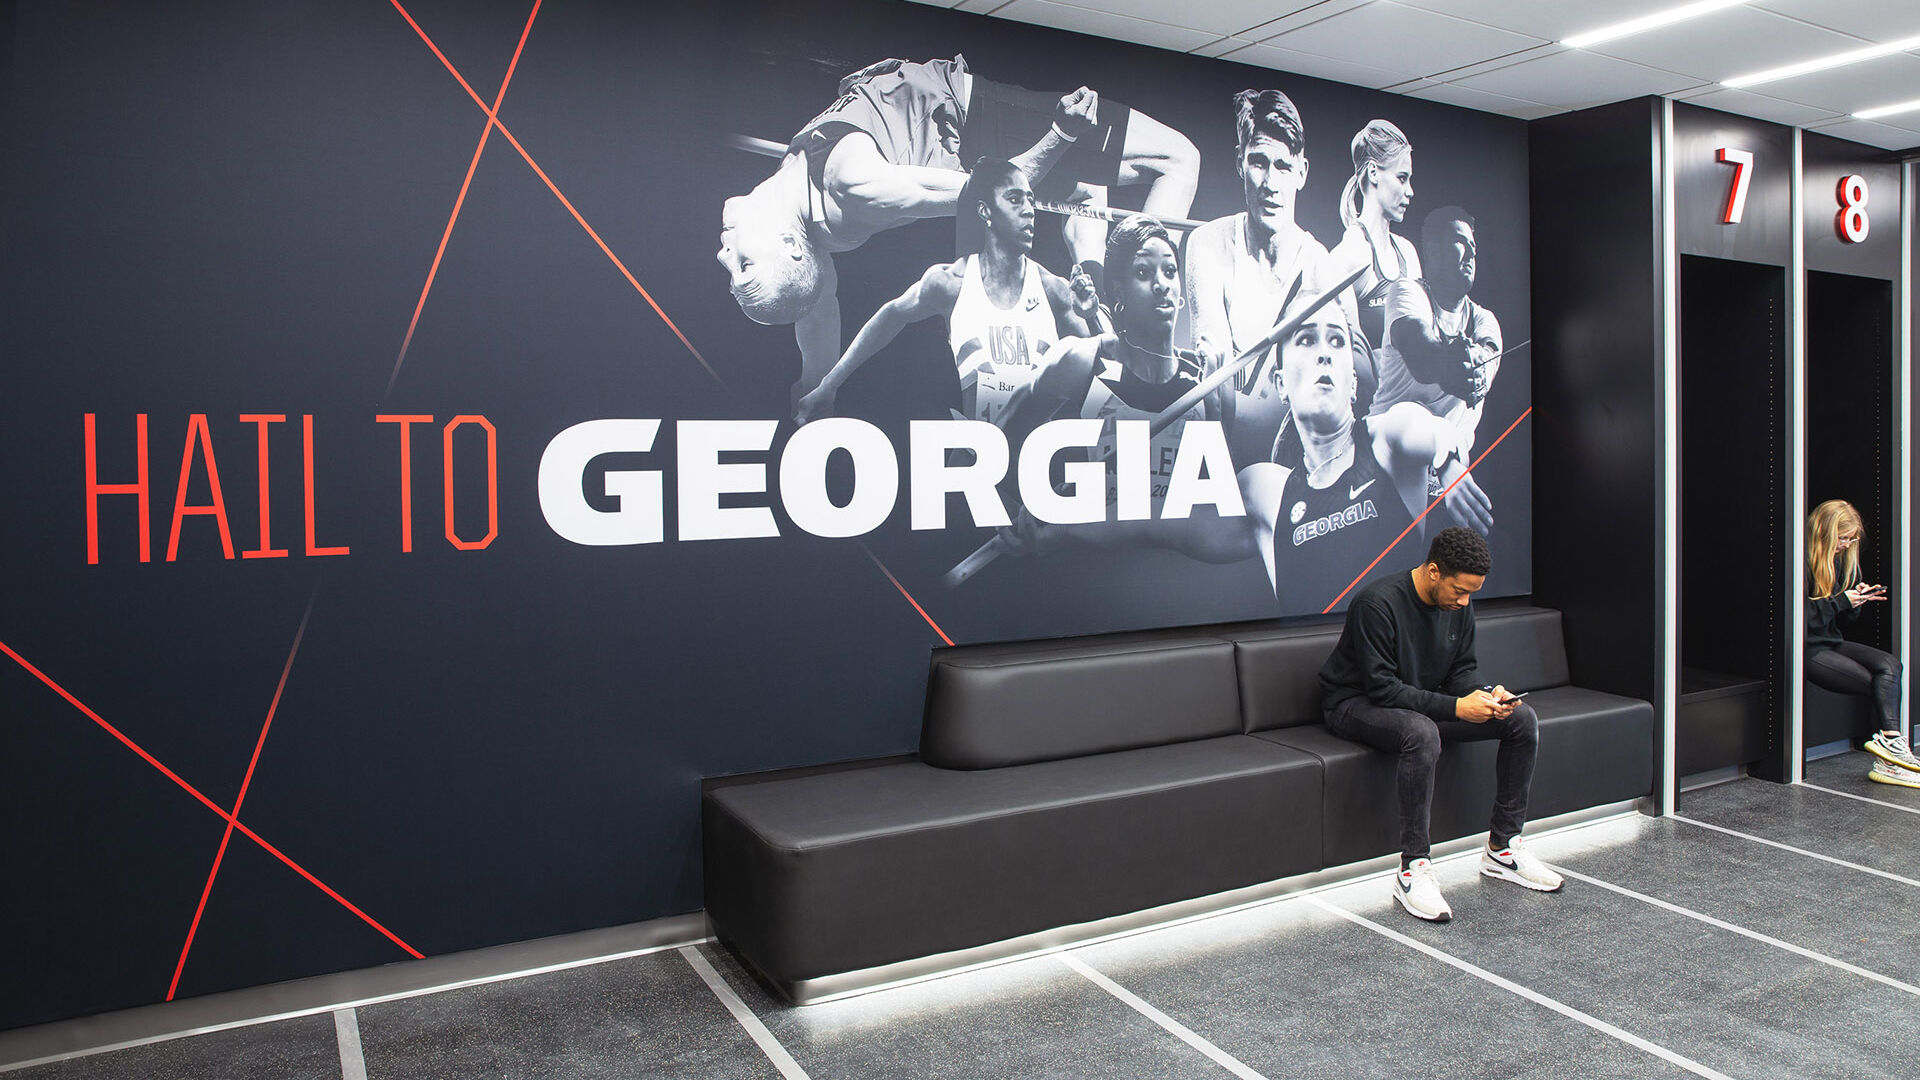 University of Georgia Track and Field Mudroom wall mural